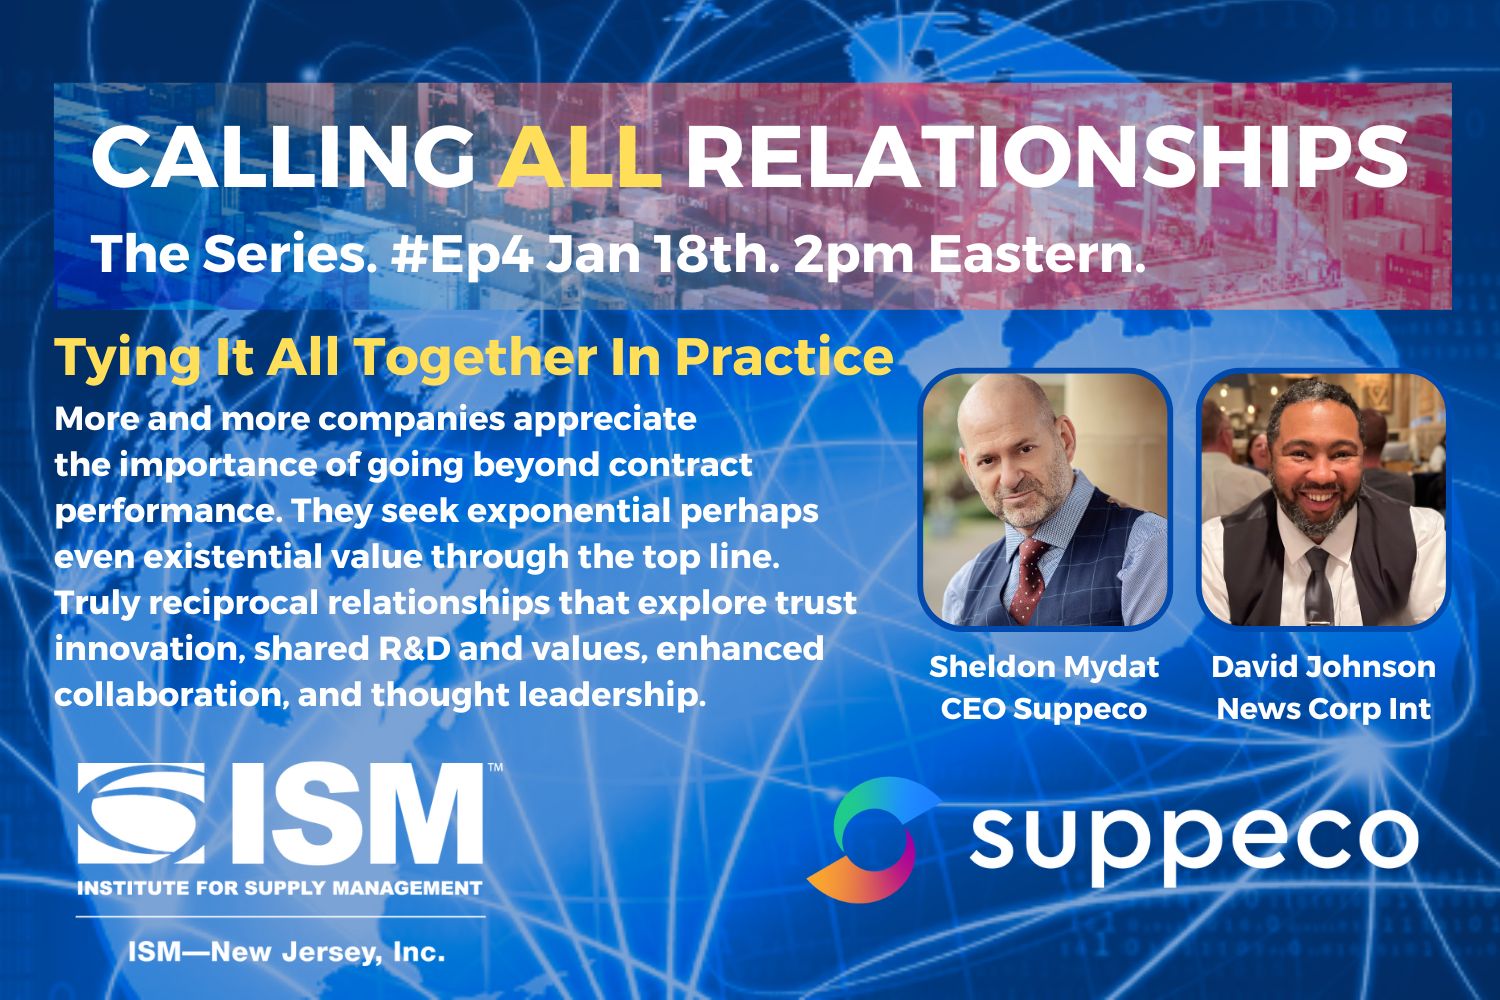 Suppeco, ISM New Jersey, Tying It all together, SRM, relationships